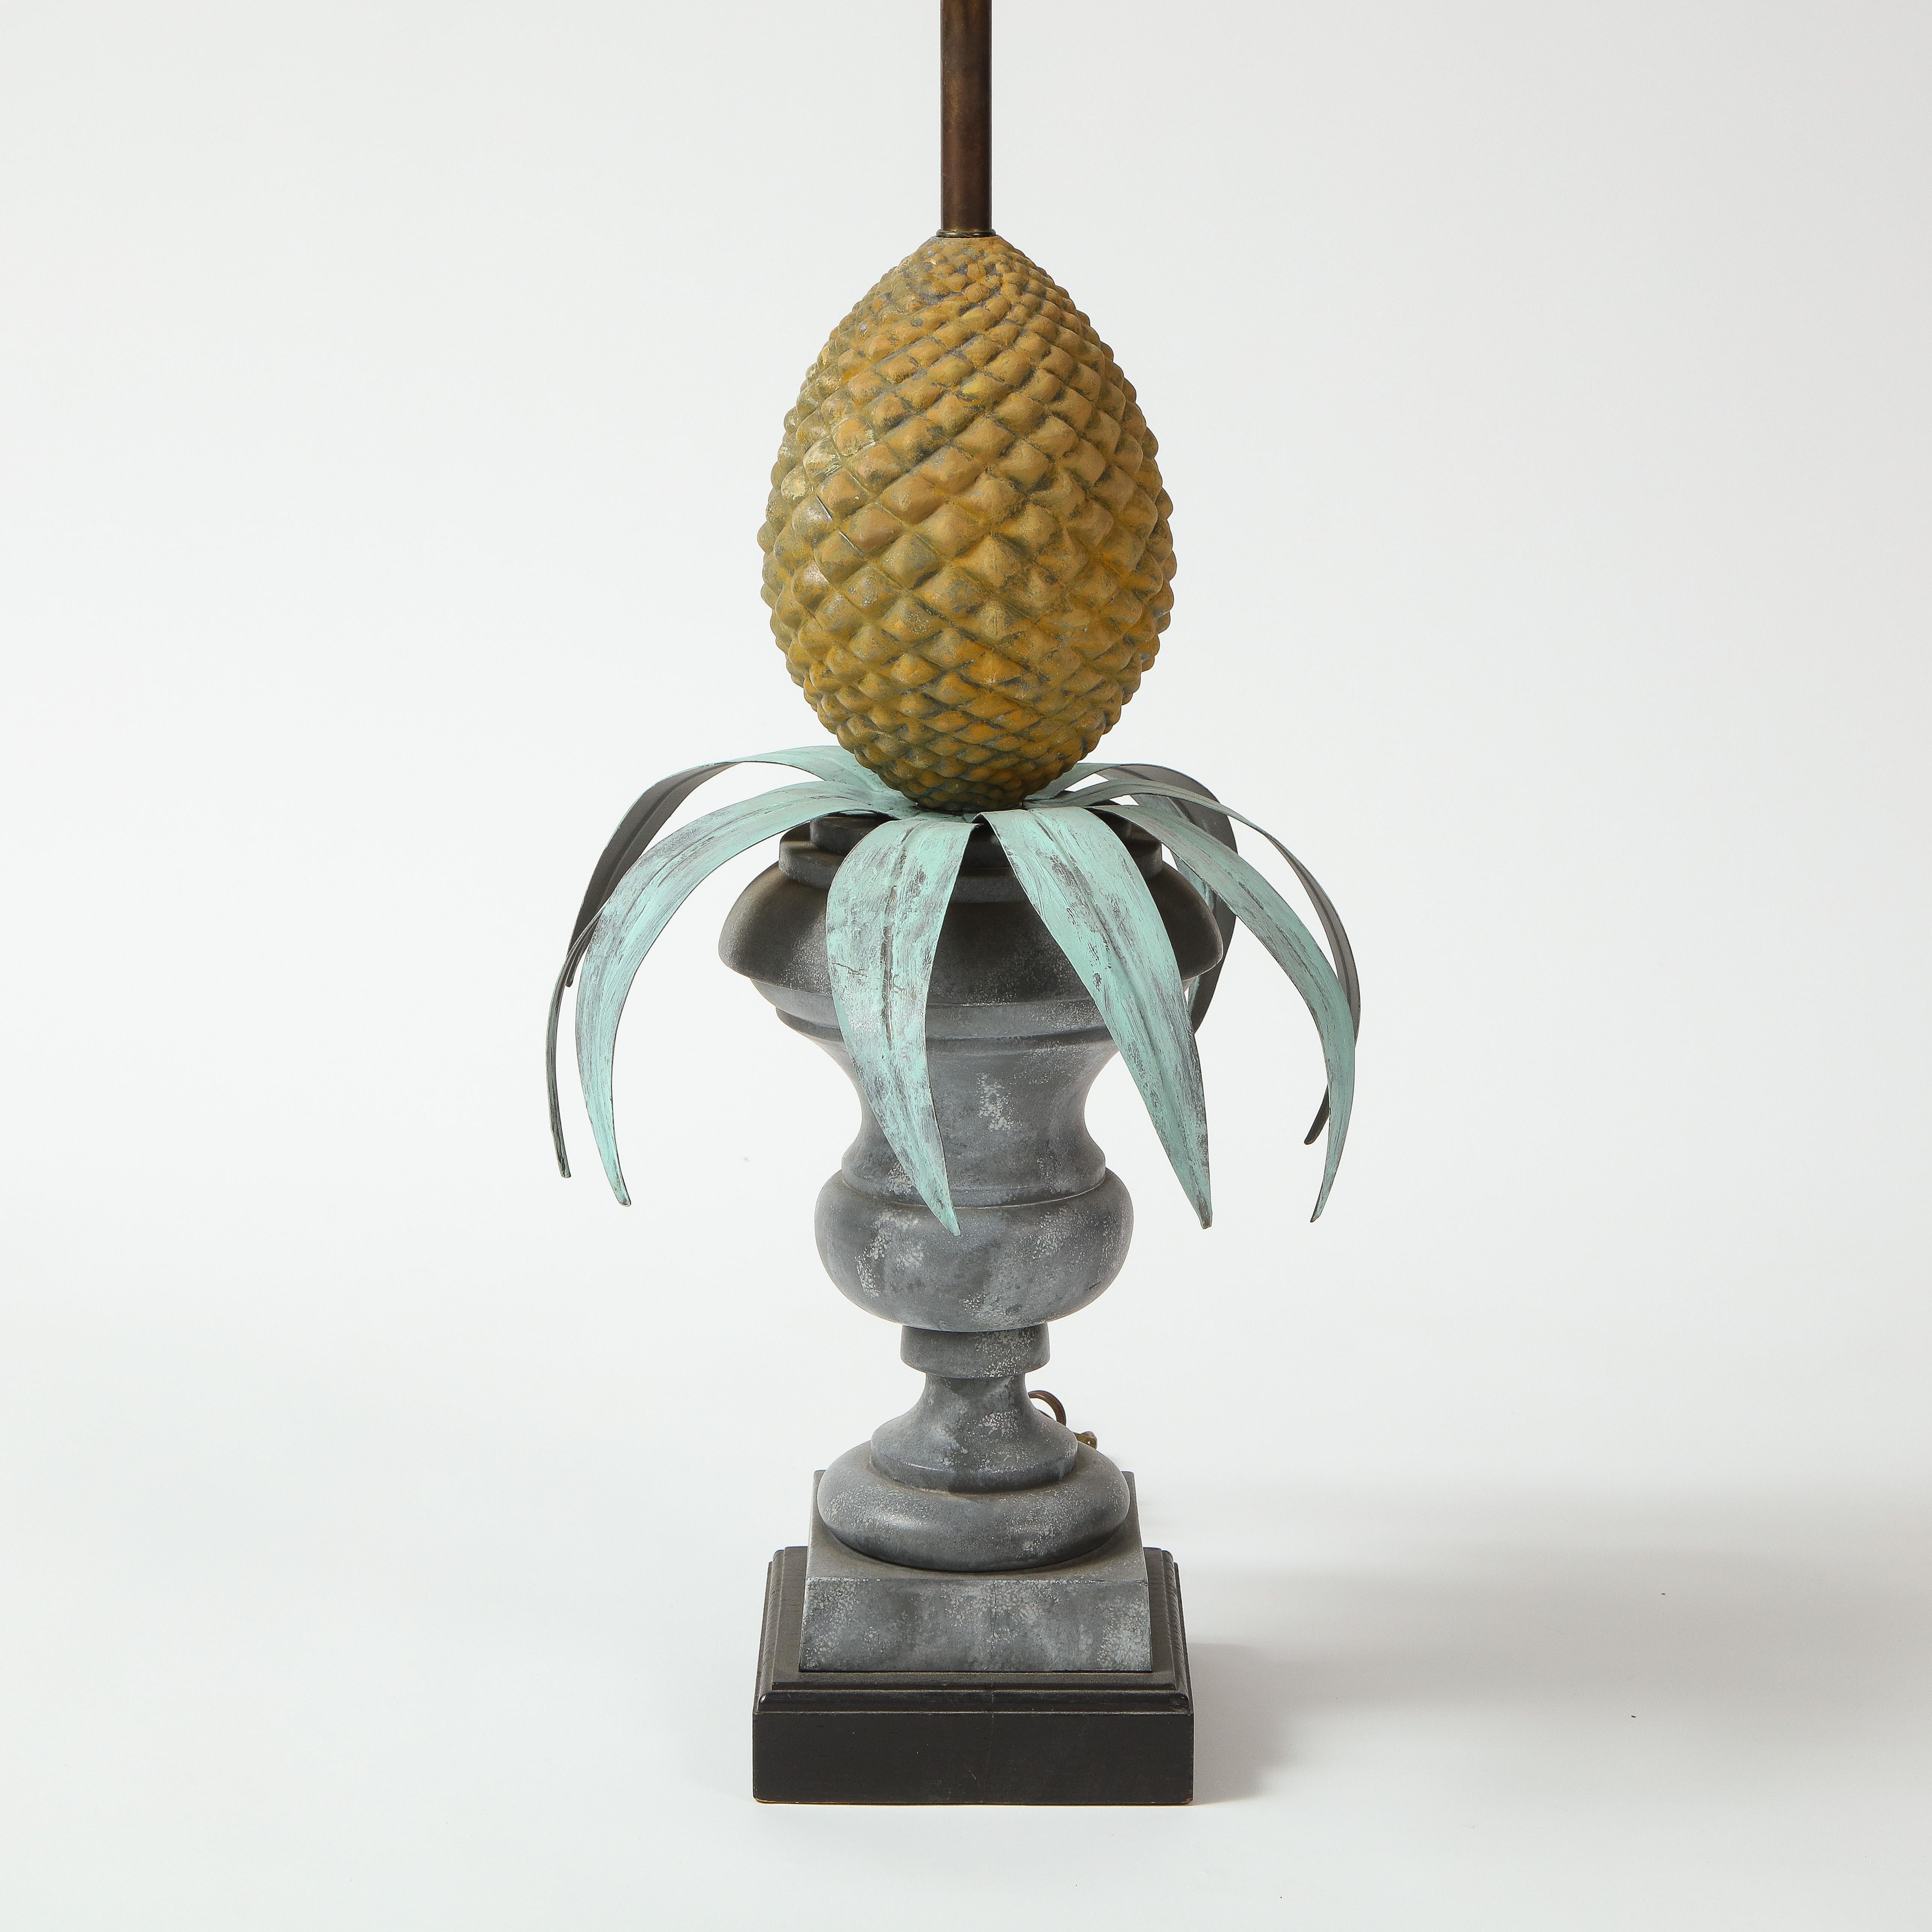 Featuring a pineapple resting on a footed urn; fitted with two bulb sockets.